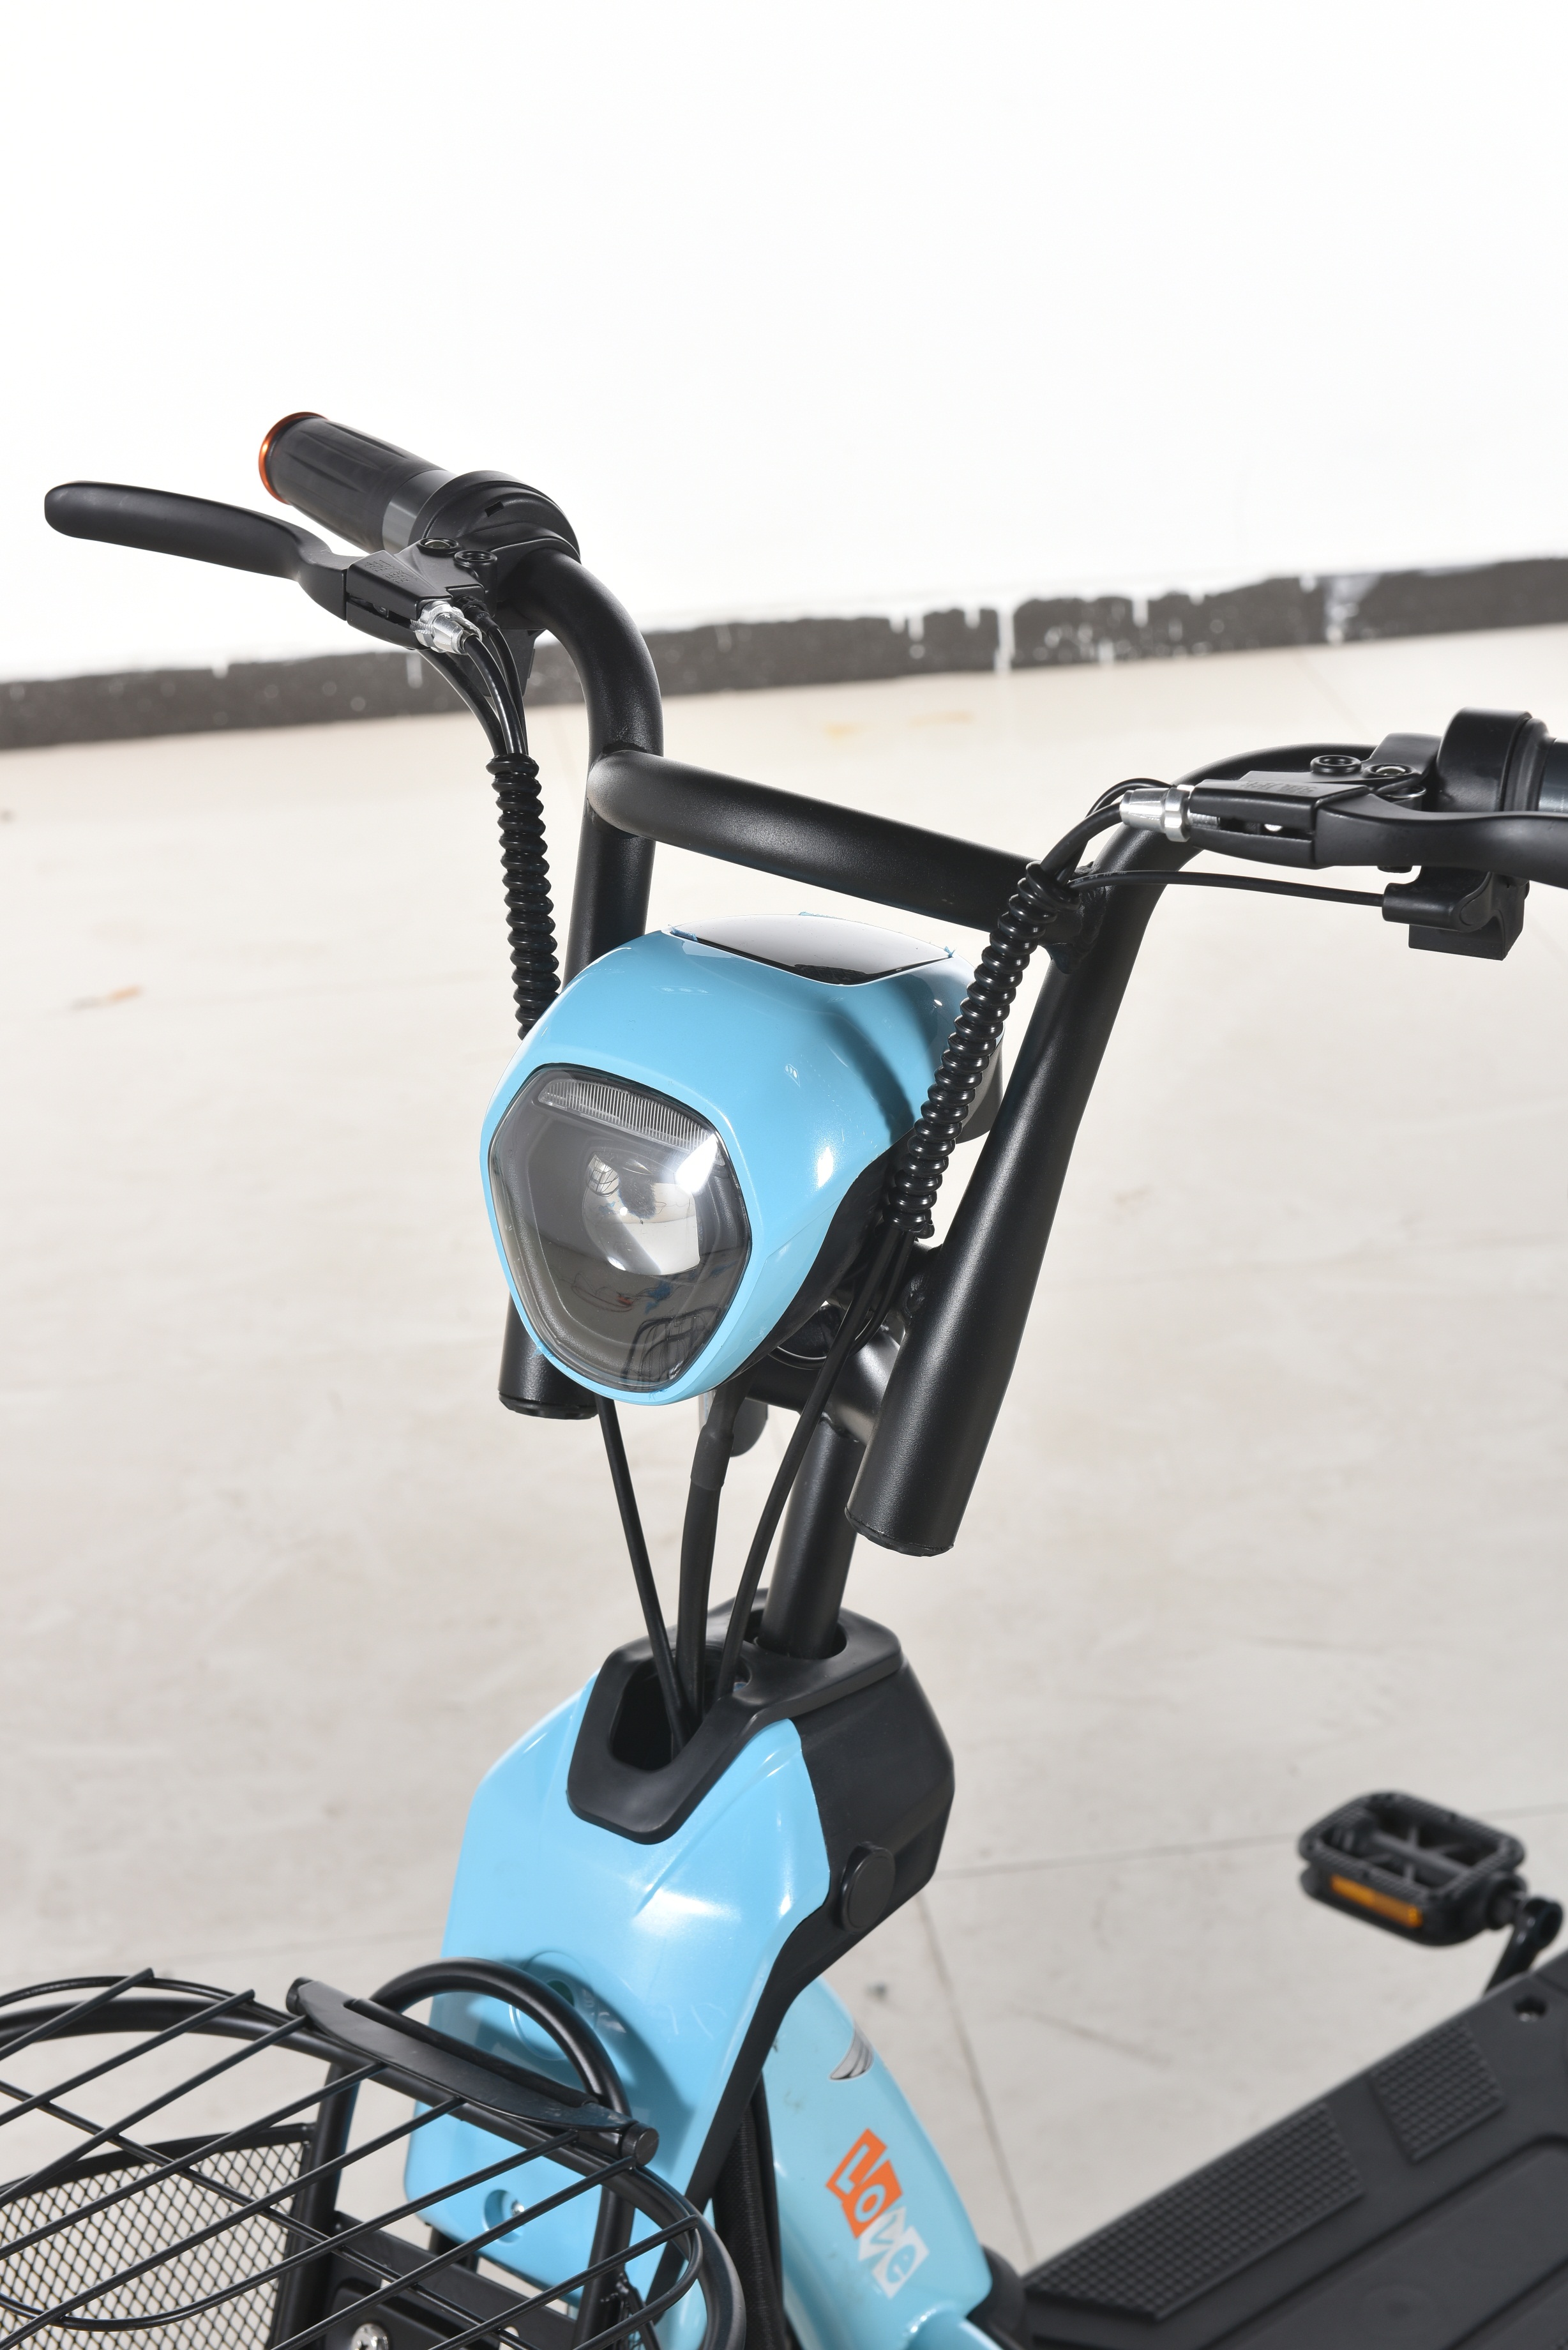 2020 The 48V 350W electric bicycle  hot sale and cheap  e bike in the eblike  market